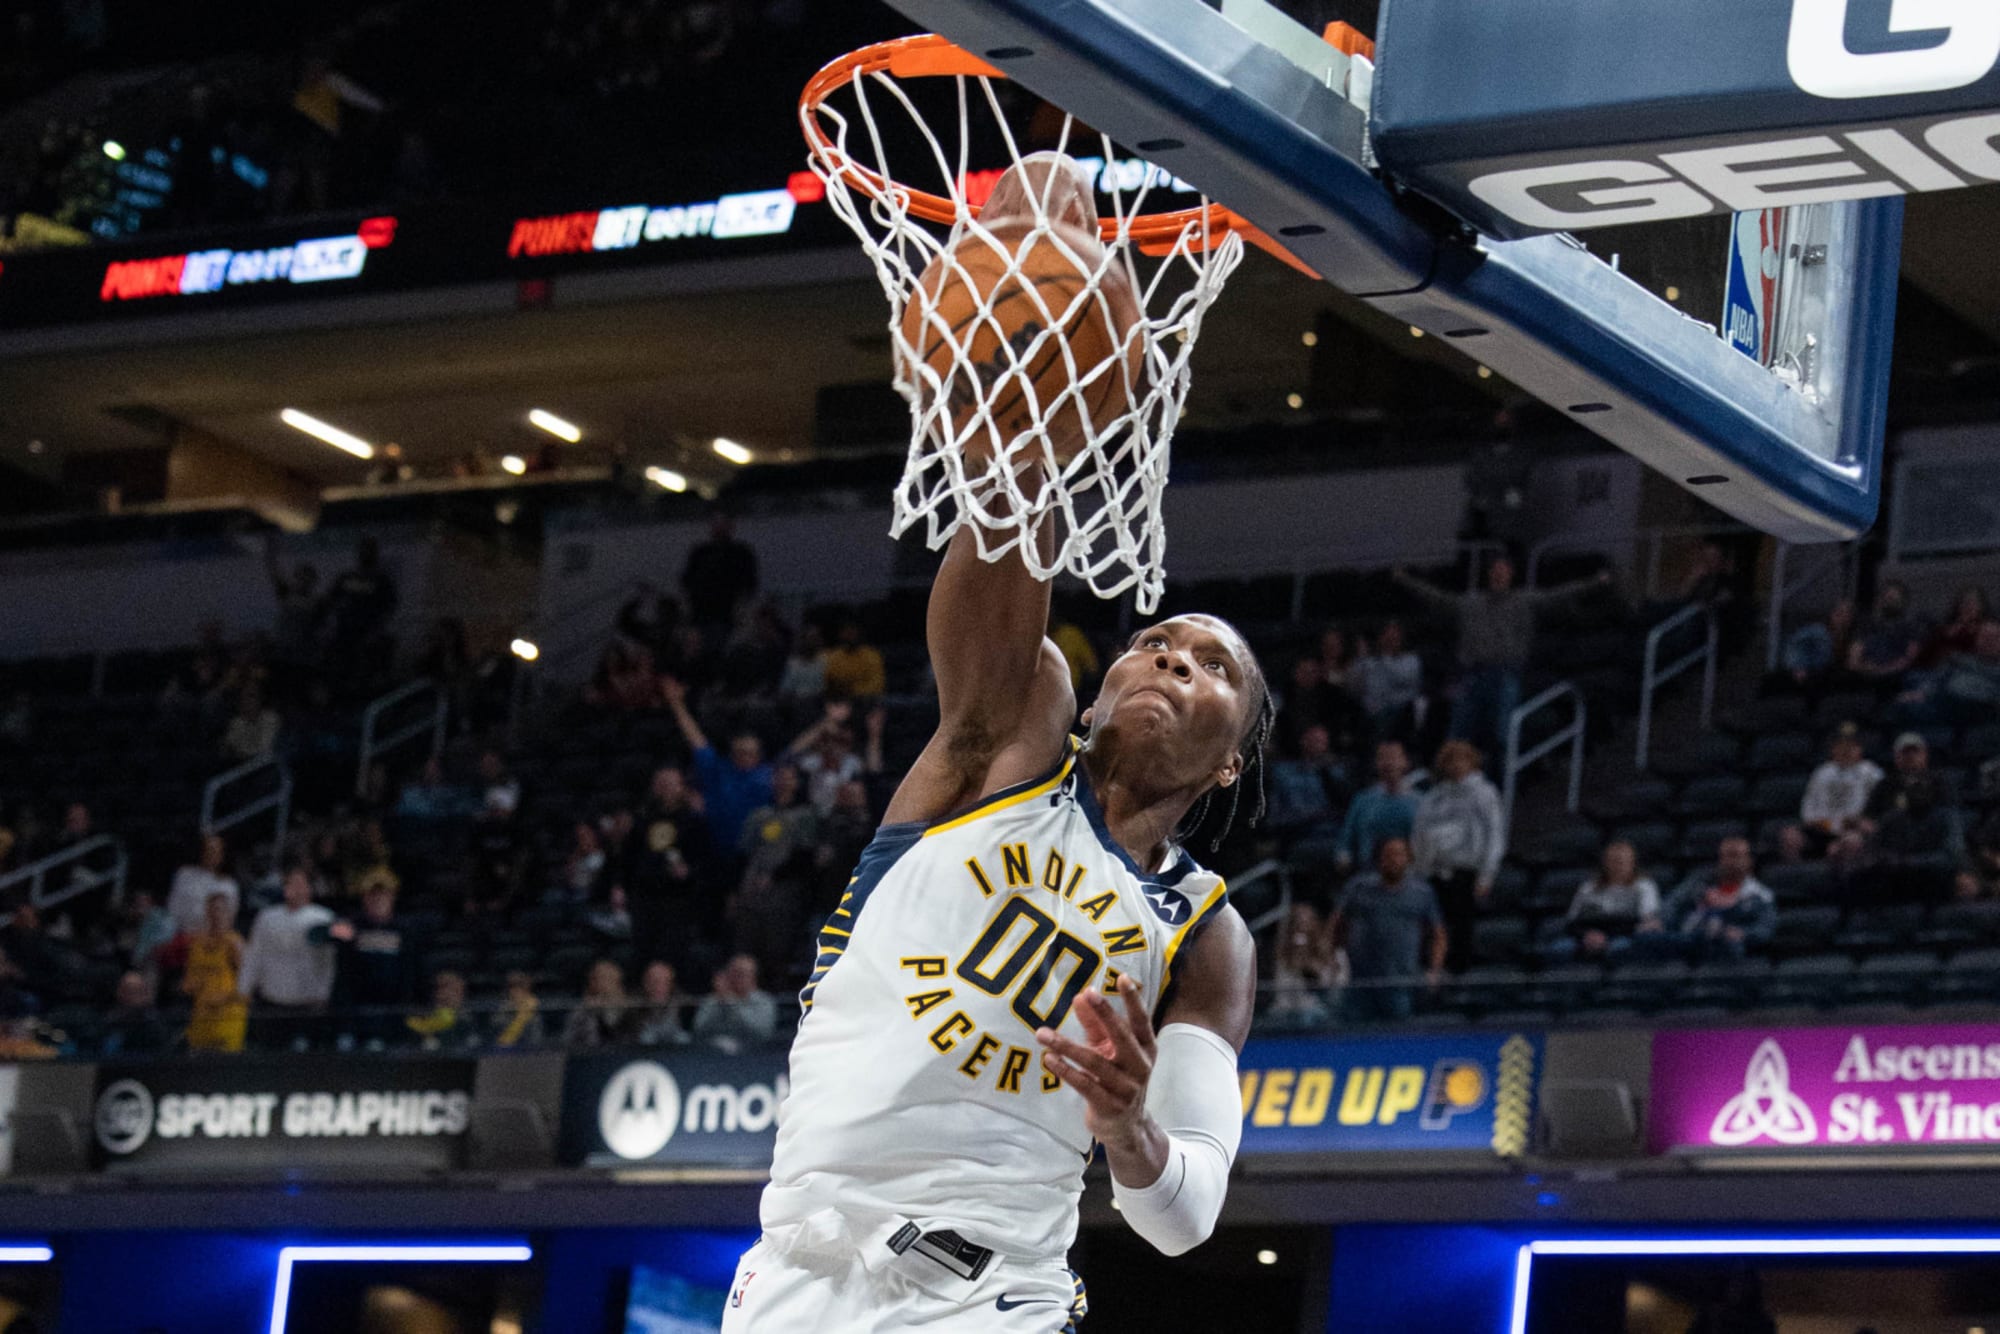 Hot Takes from Pacers' Bennedict Mathurin Summer League Game